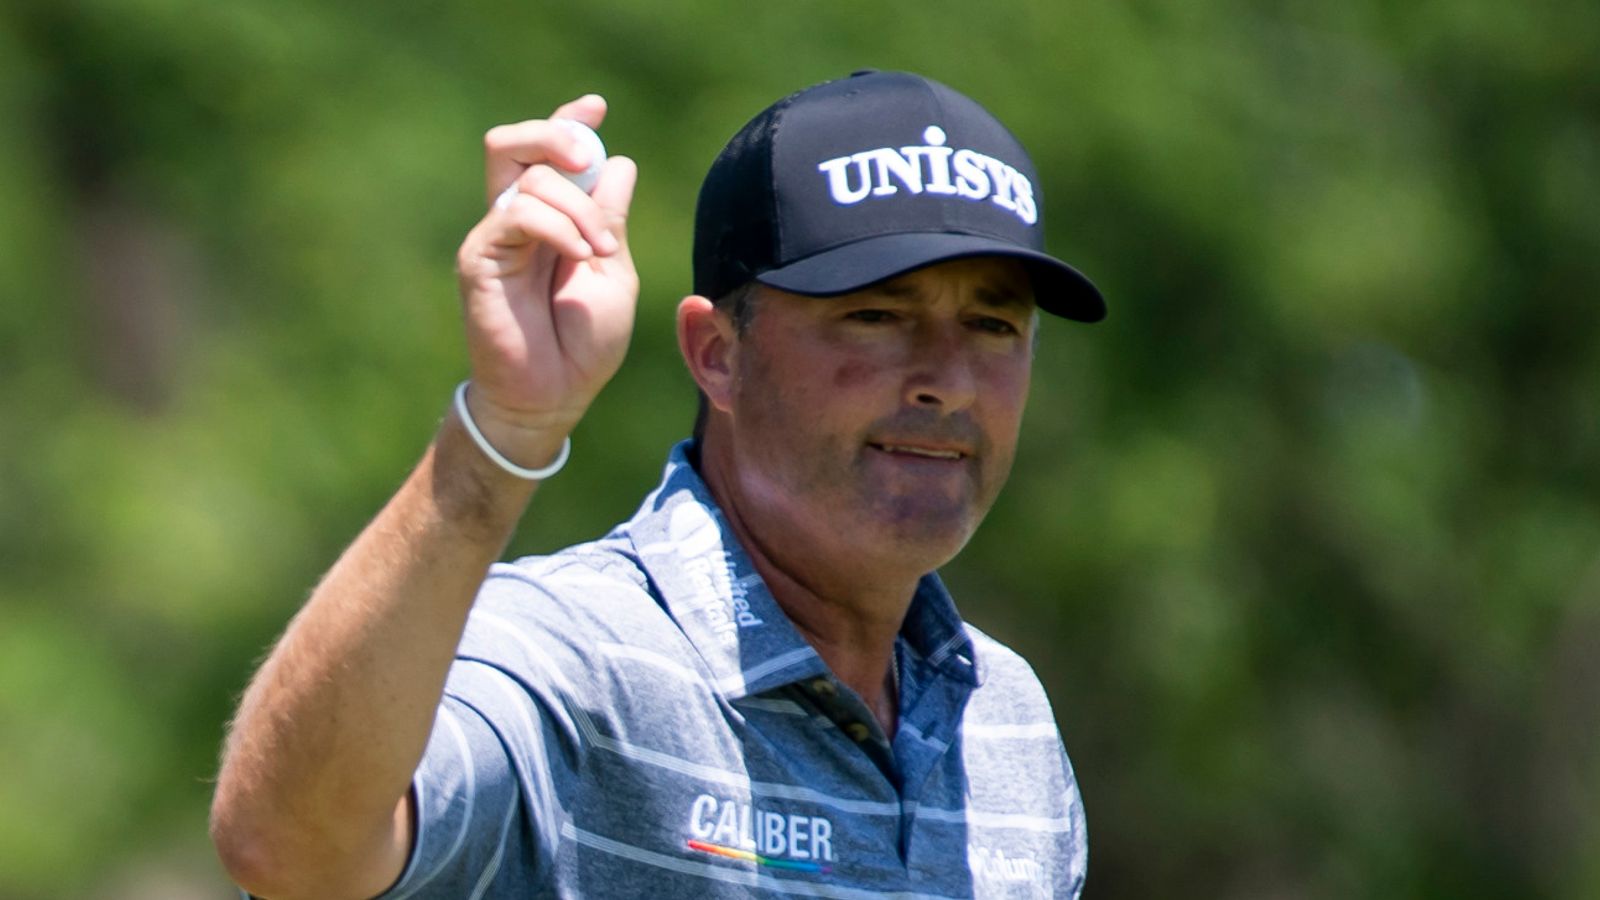 Ryan Palmer joins three-way tie atop Byron Nelson leaderboard at halfway stage